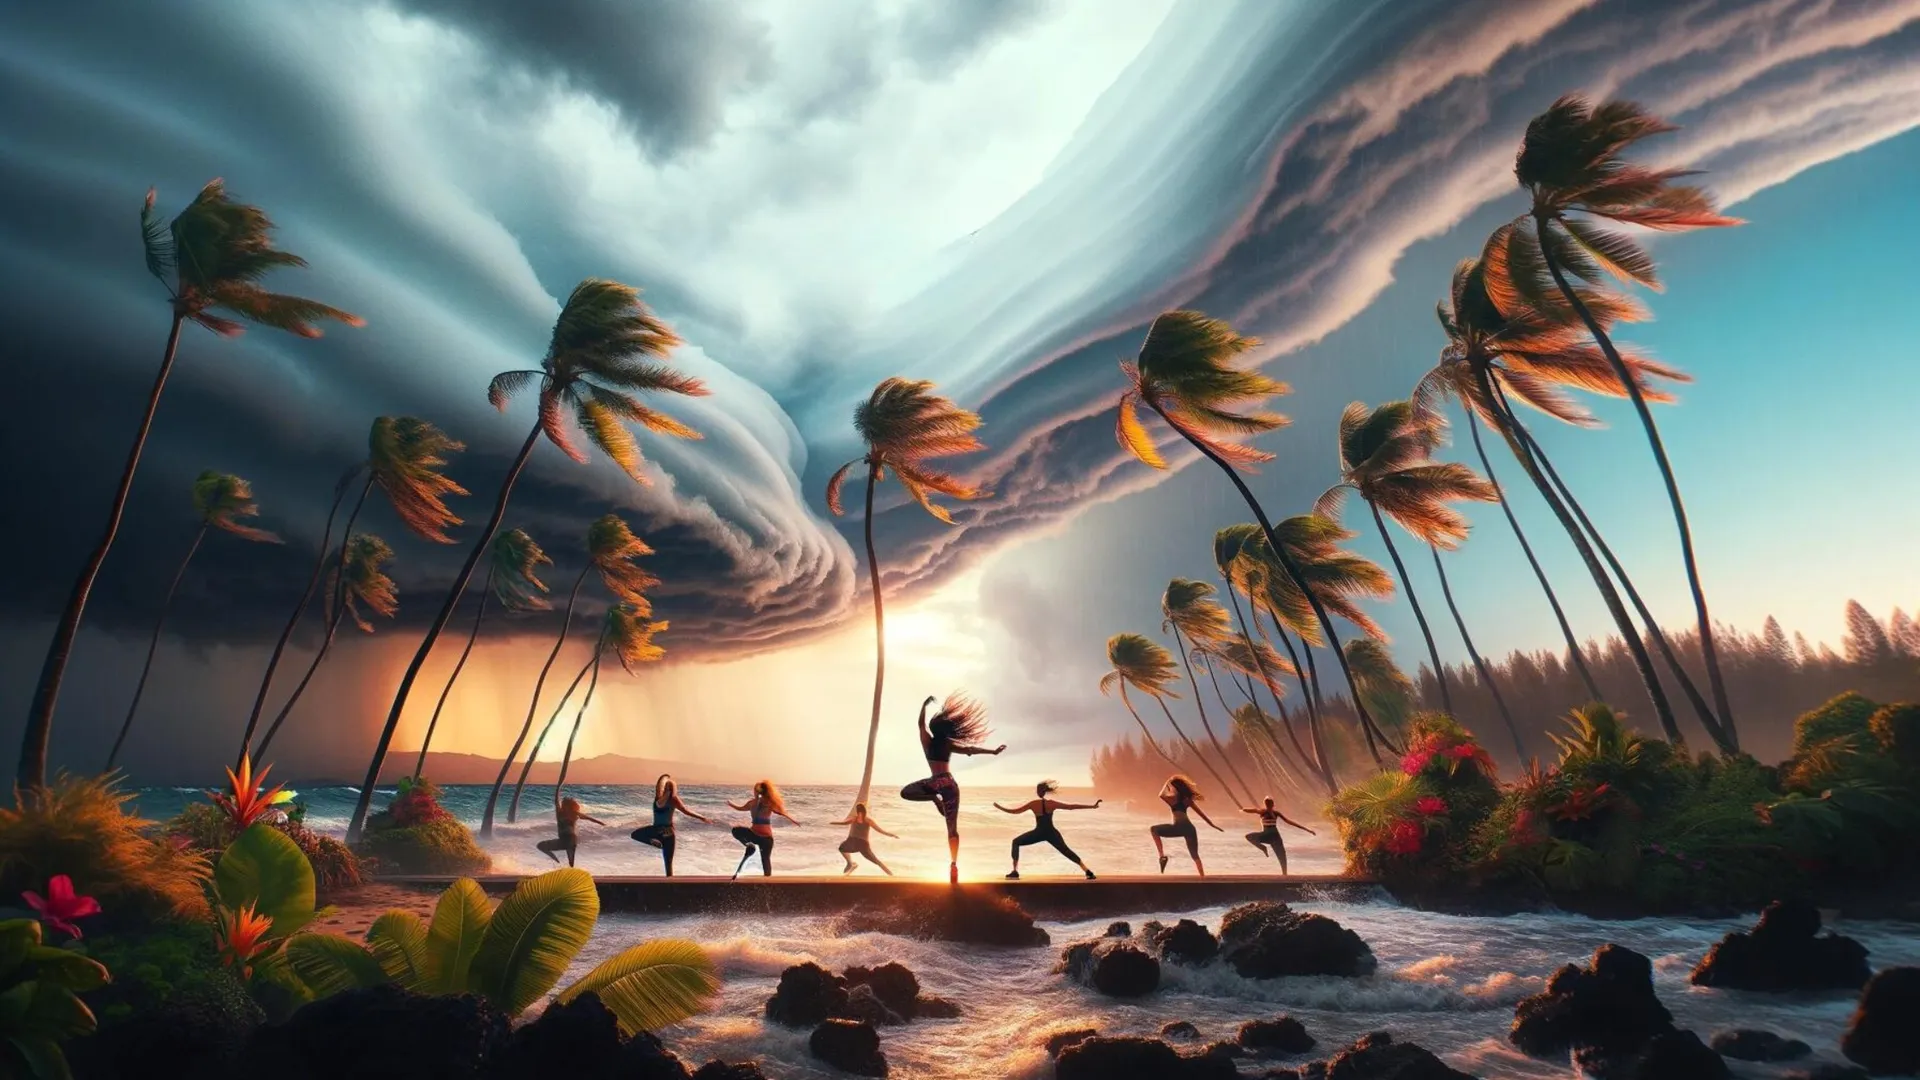 The Resilient Dance of the Palm Tree